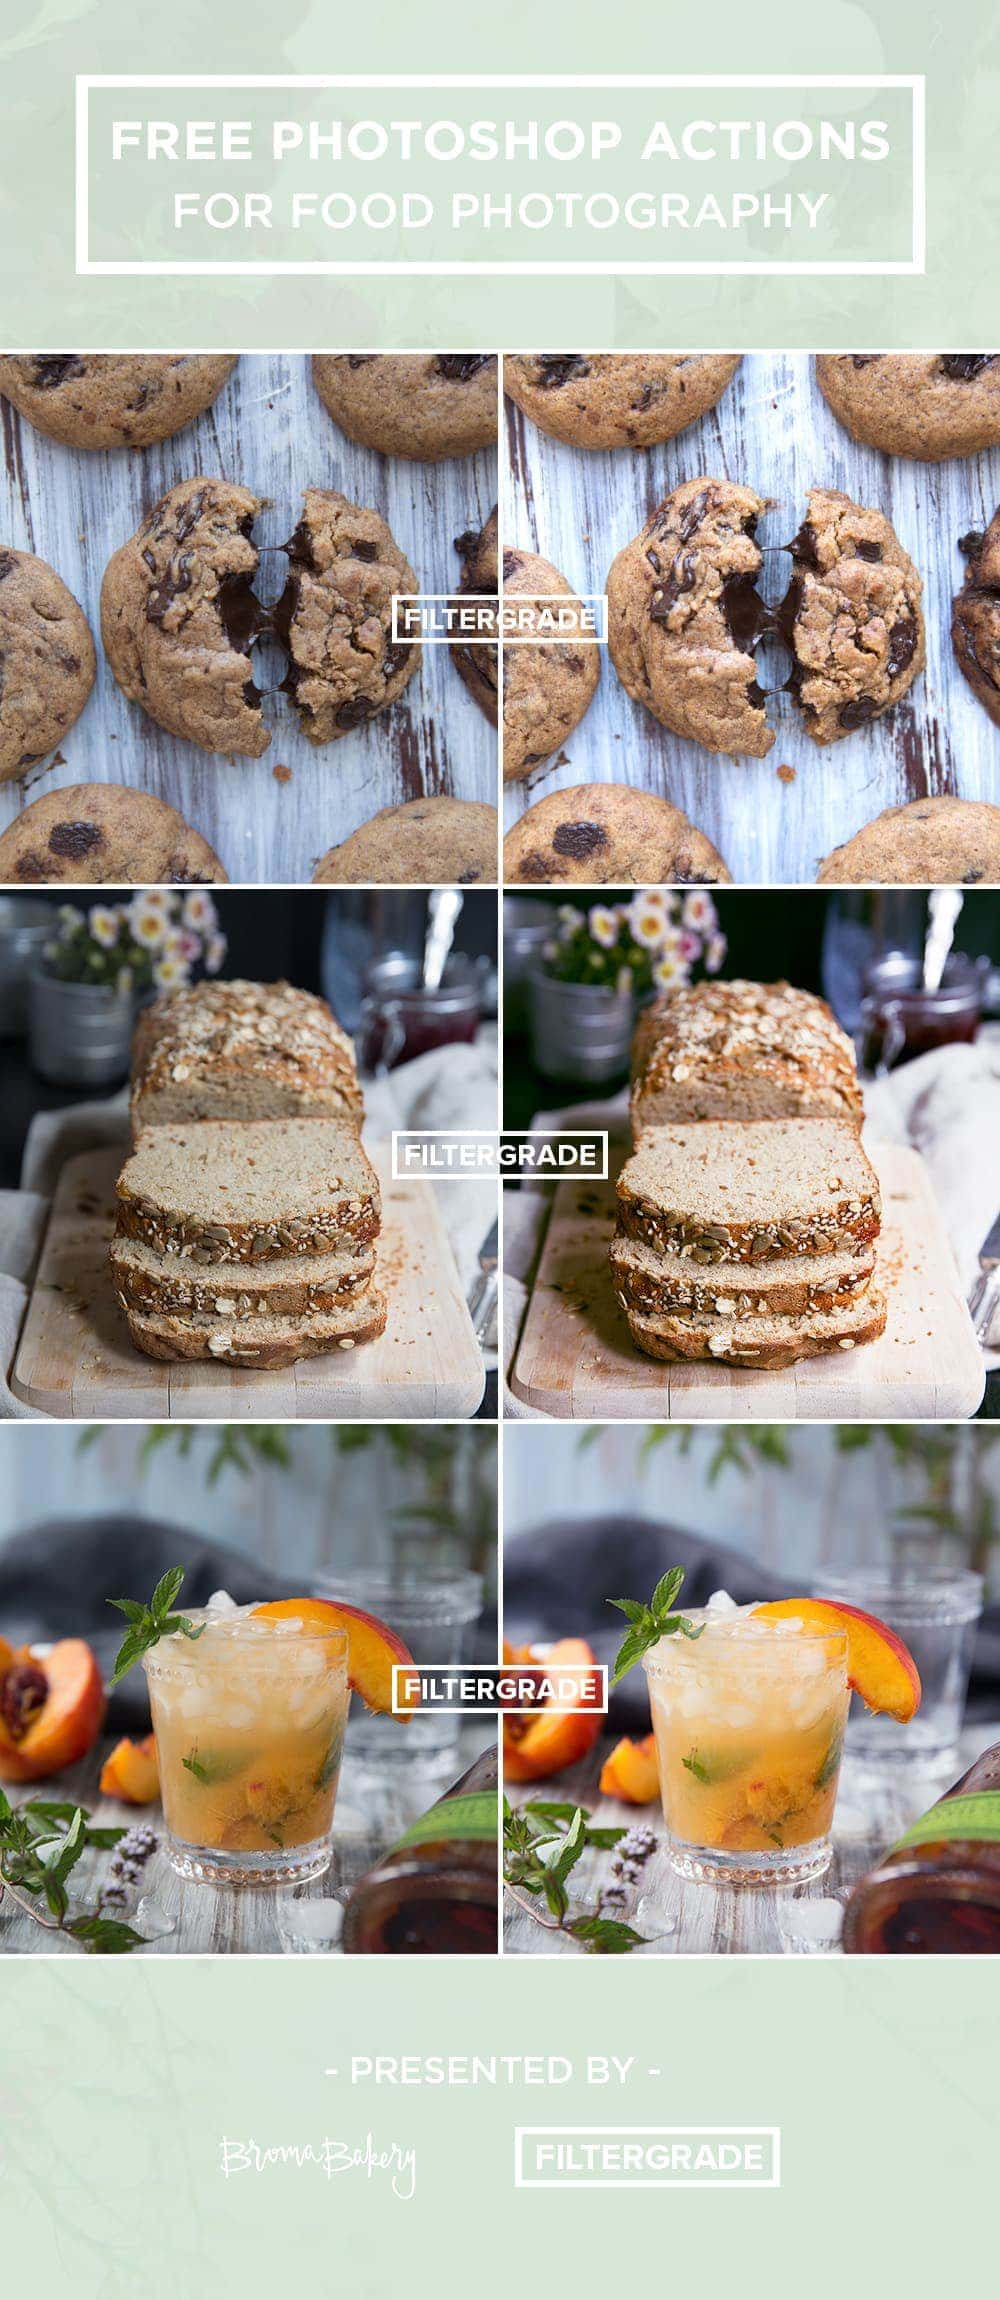 Transform your photographs instantly with free Photoshop actions for food photography!